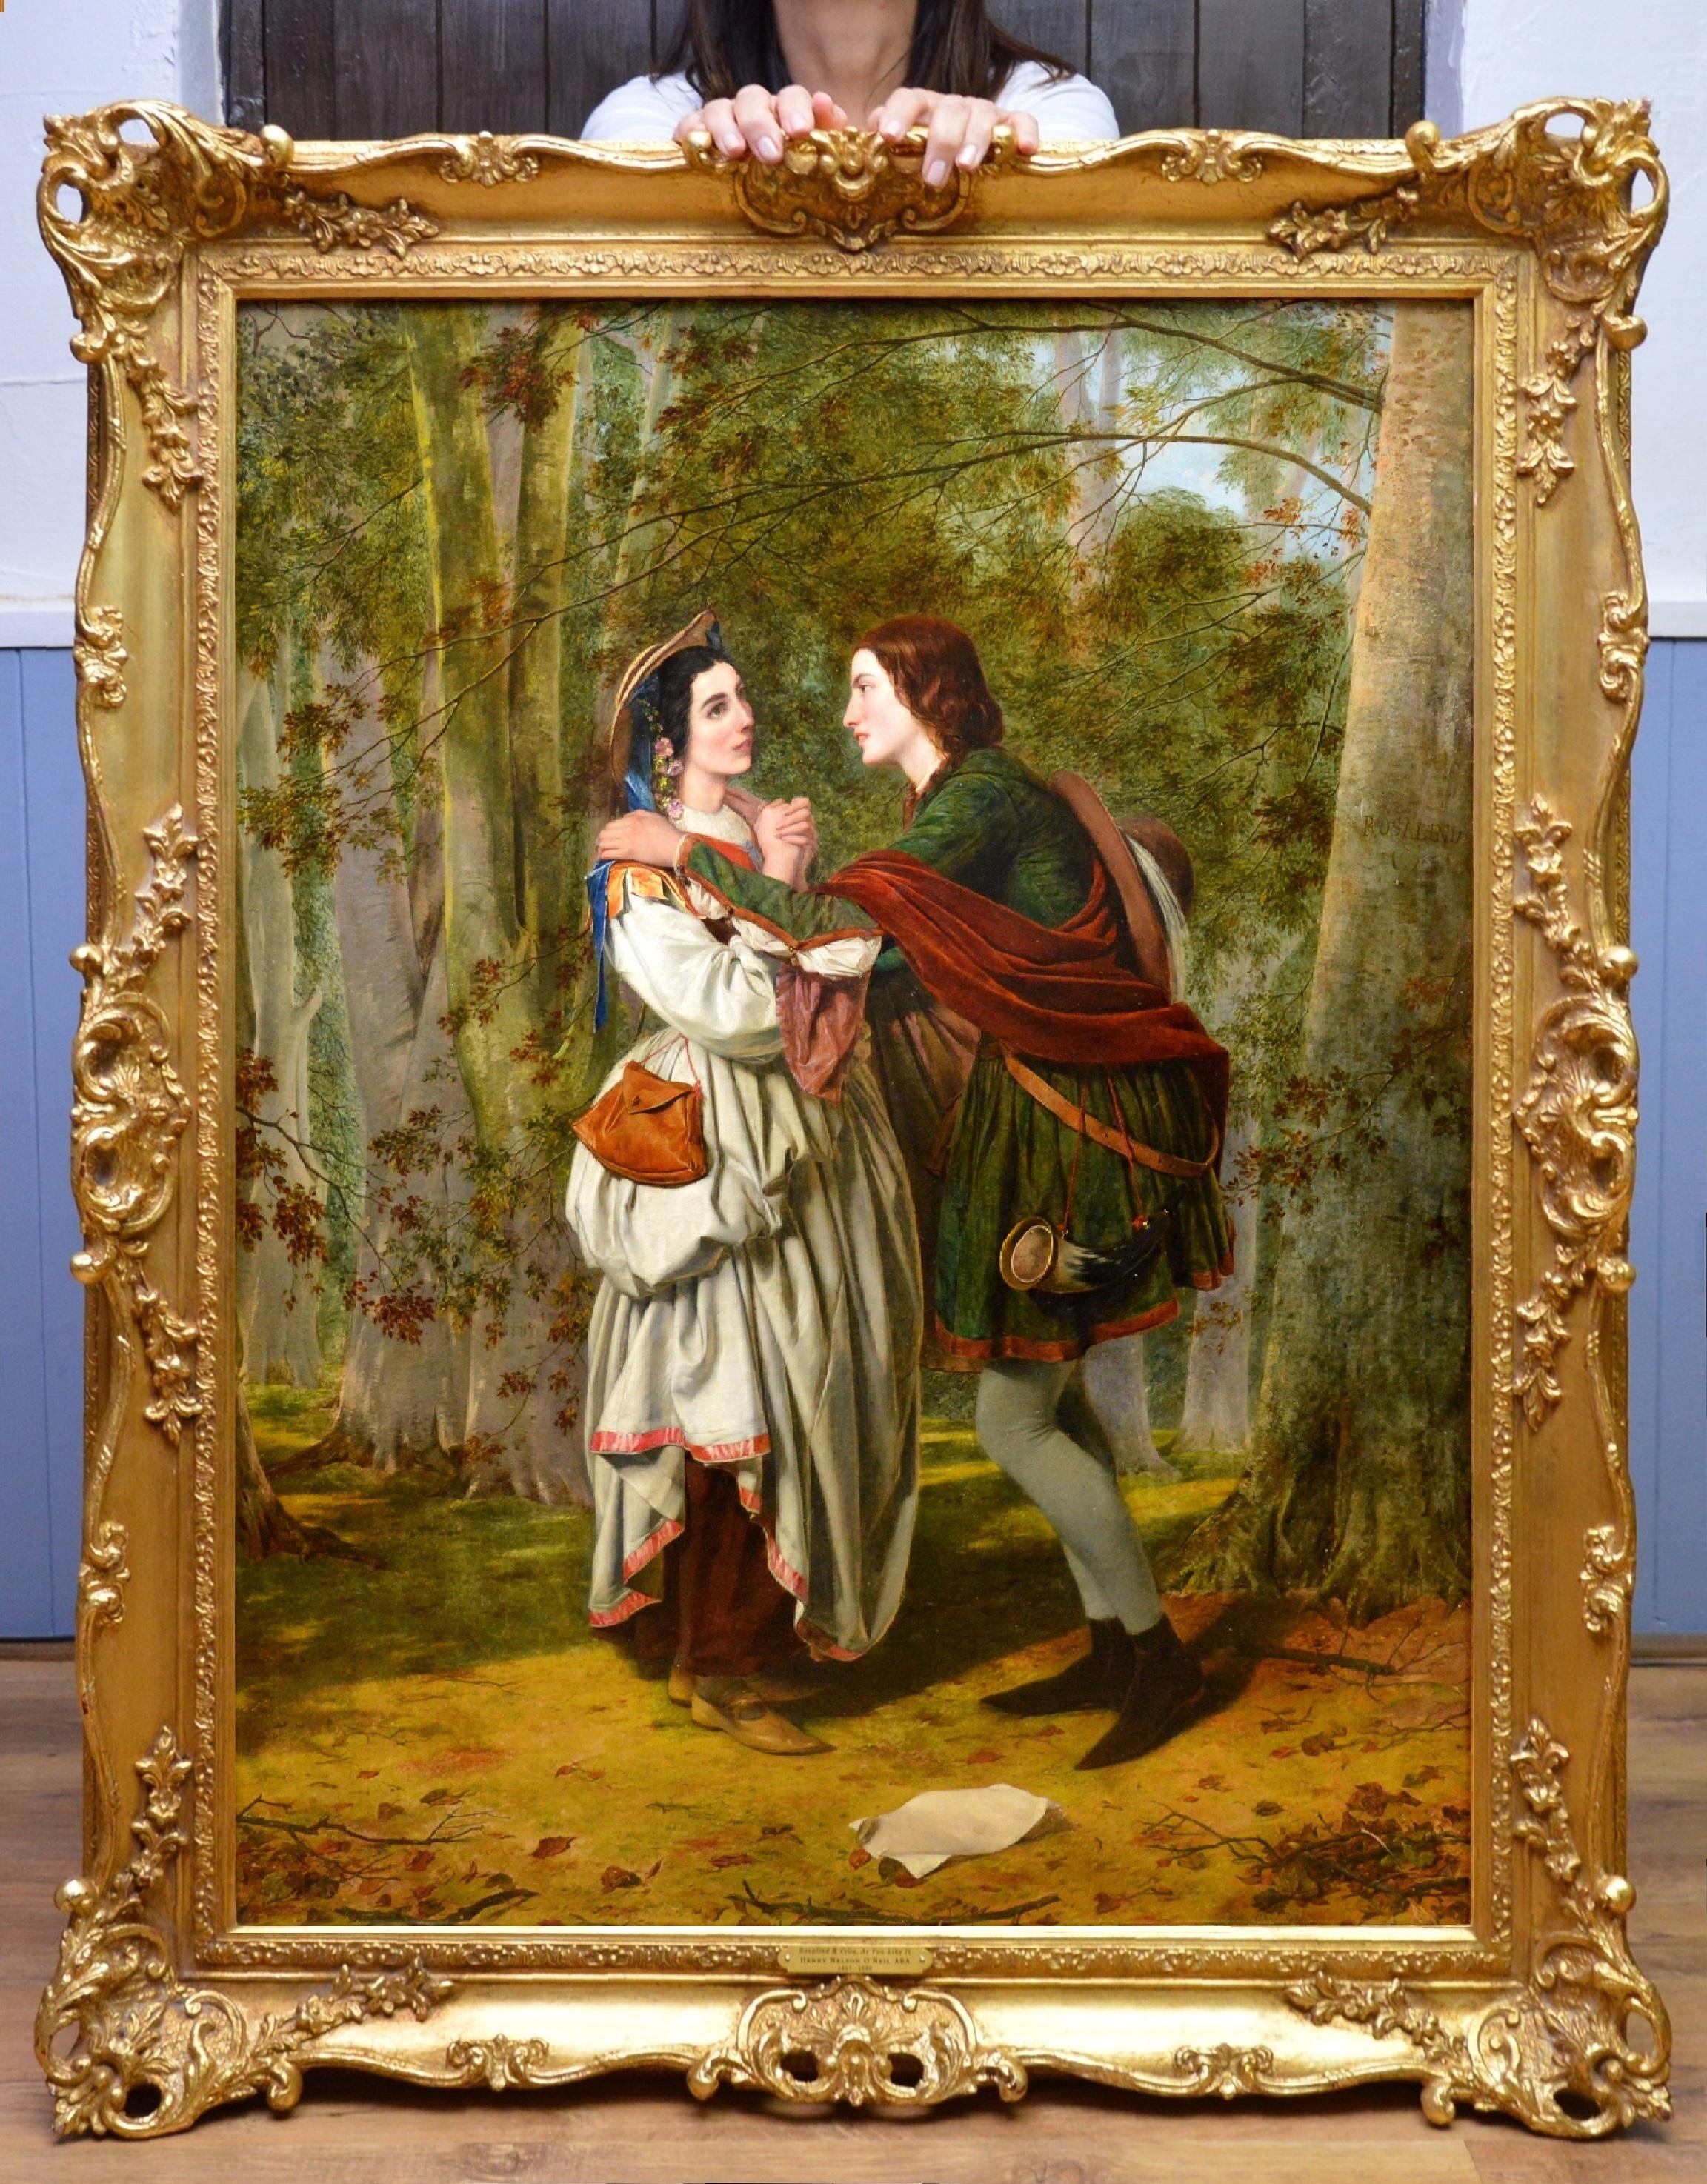 Rosalind & Celia, As You Like It - 19thC Oil Painting Shakespeare Royal Academy - Brown Portrait Painting by Henry Nelson O'Neil